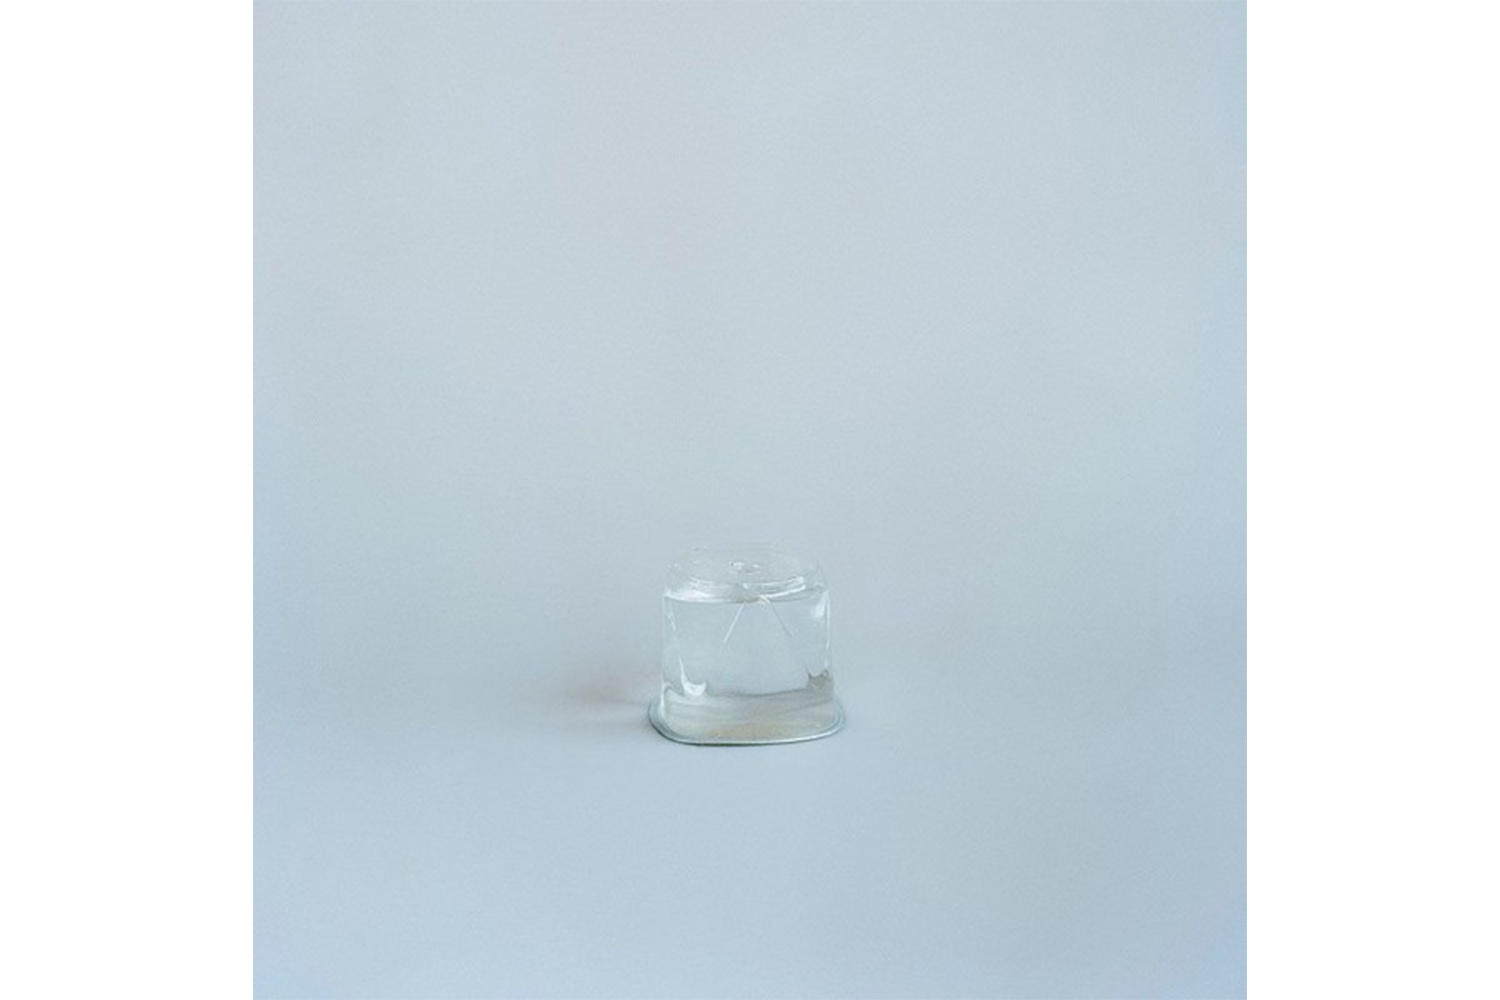 Redeployment_45, from the series ''Reform-Reset-Revisit'', 2014